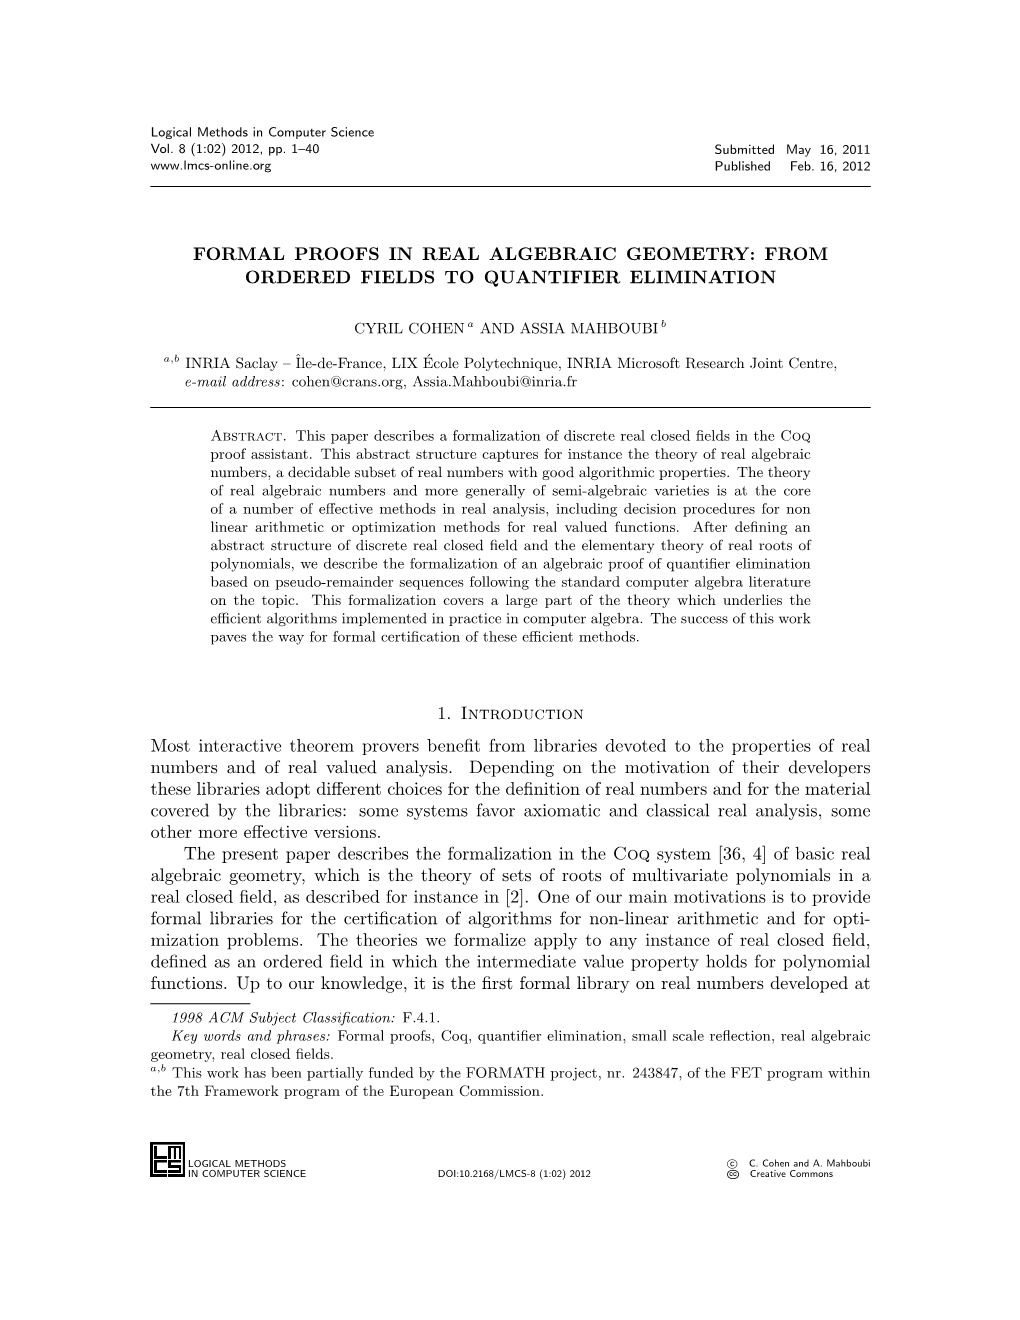 Formal Proofs in Real Algebraic Geometry: from Ordered Fields to Quantifier Elimination